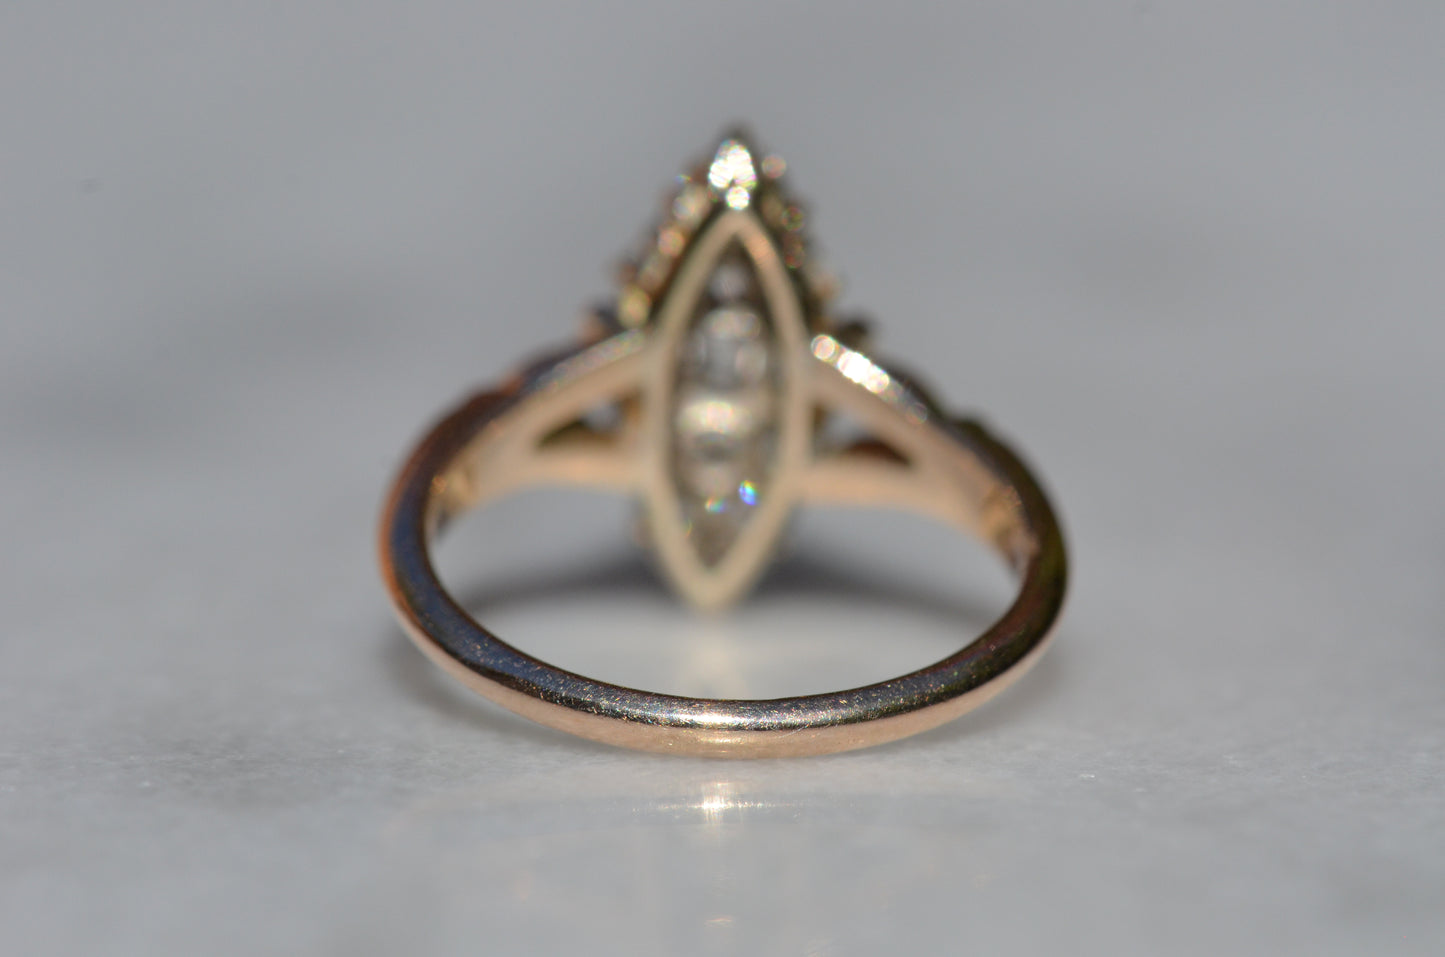 The closely cropped macro of this Victorian diamond navette ring is photographed from behind, focusing on the very good condition of the back of the band.